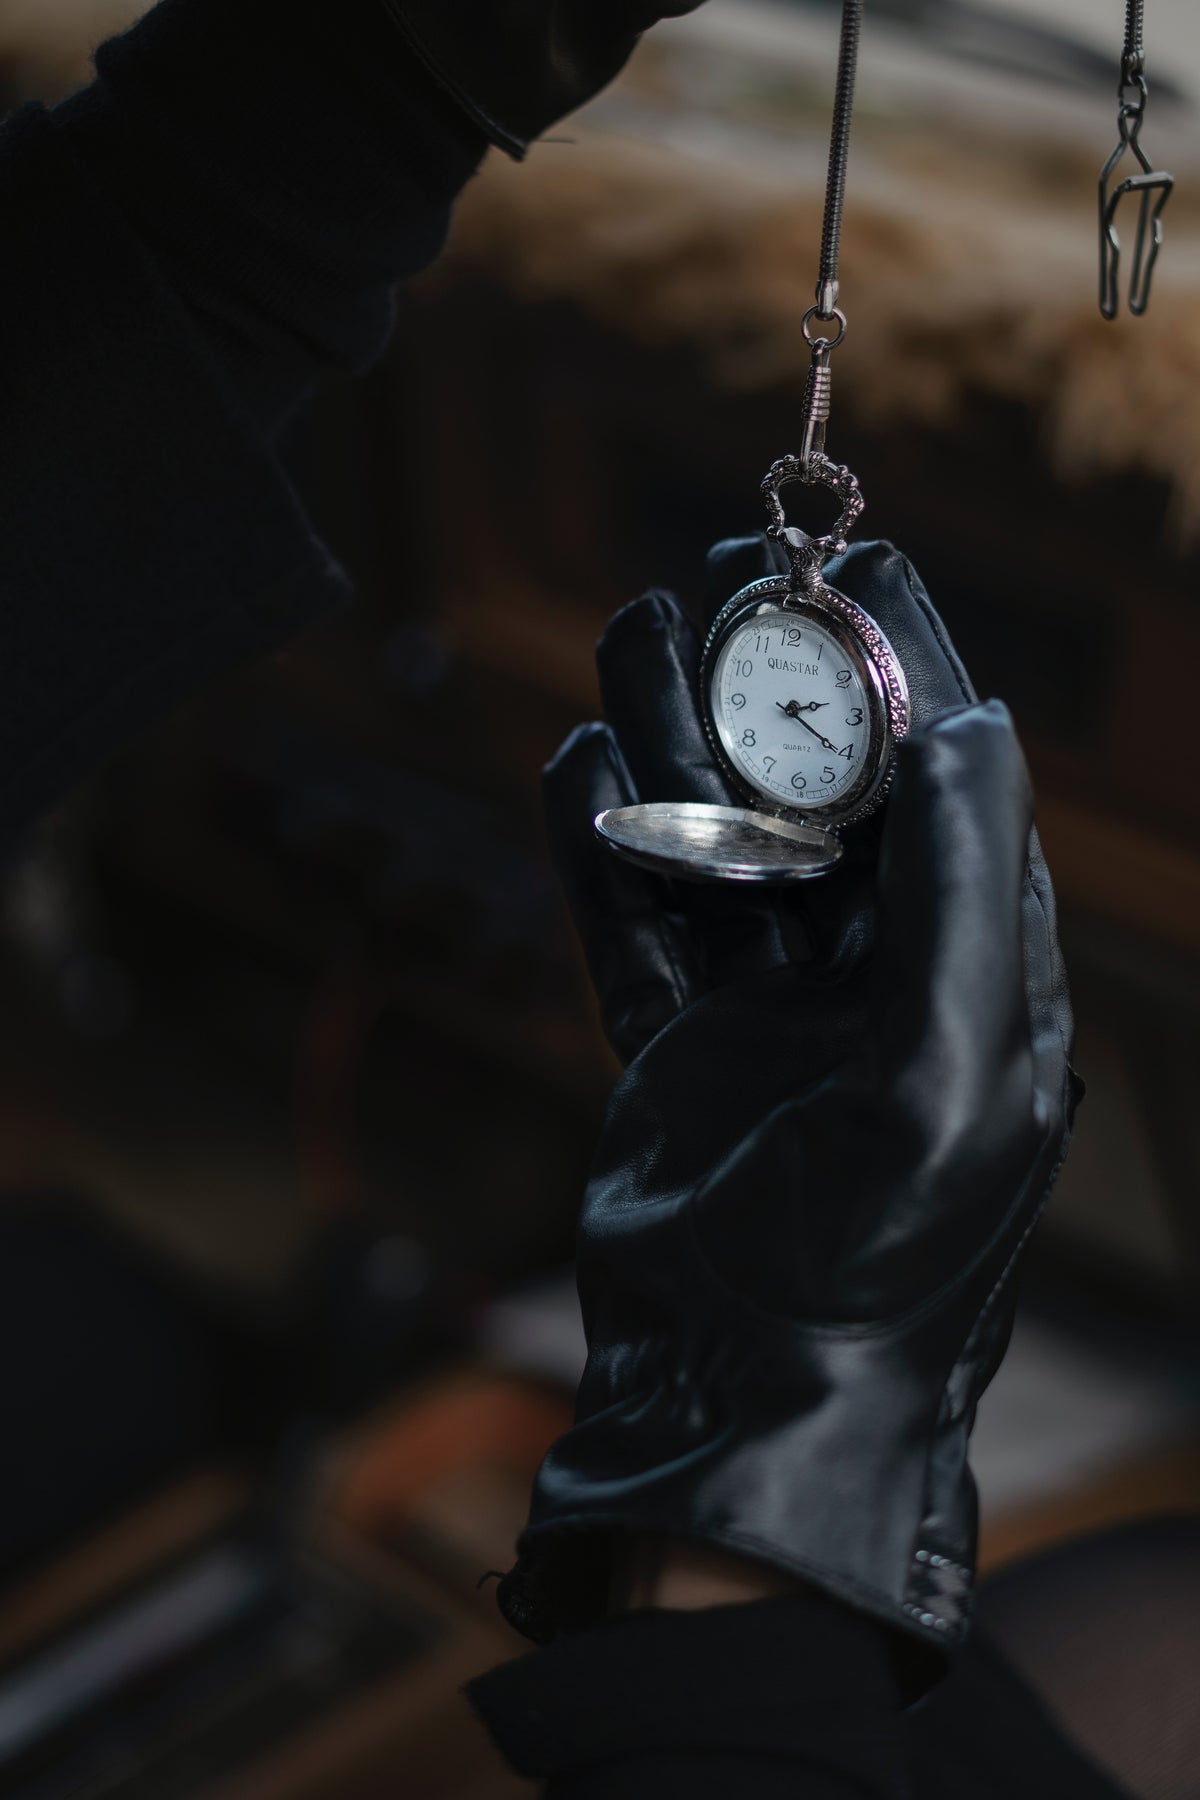 Vegan Leather Gloves Holding The Watch